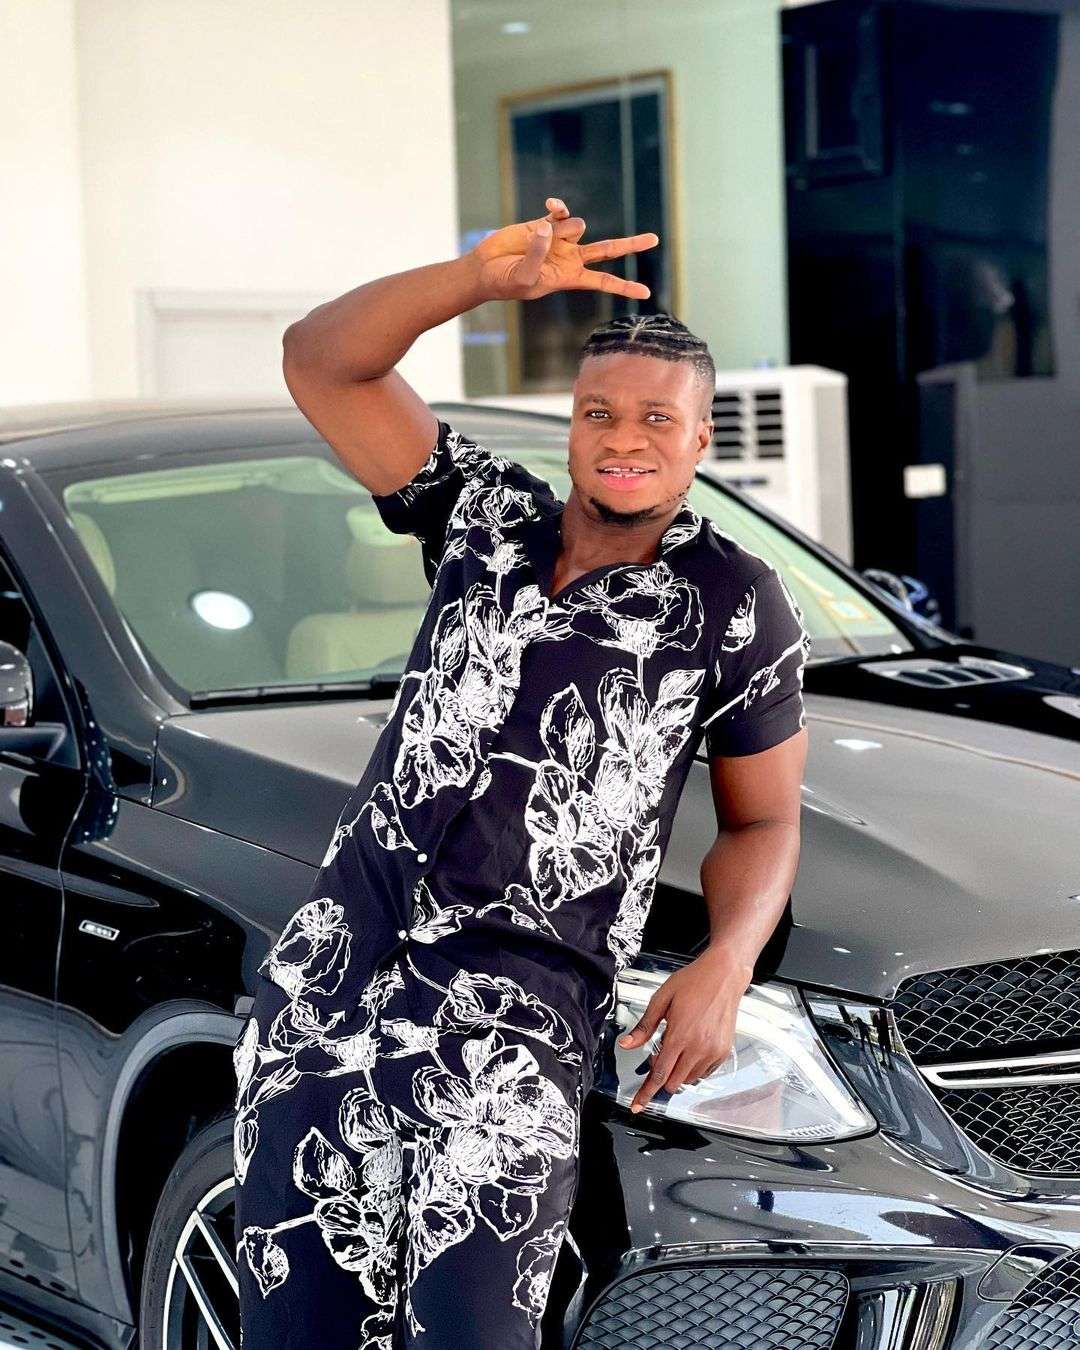 One of the most well-known comedians, Zicsaloma, spends millions on the newest Benz